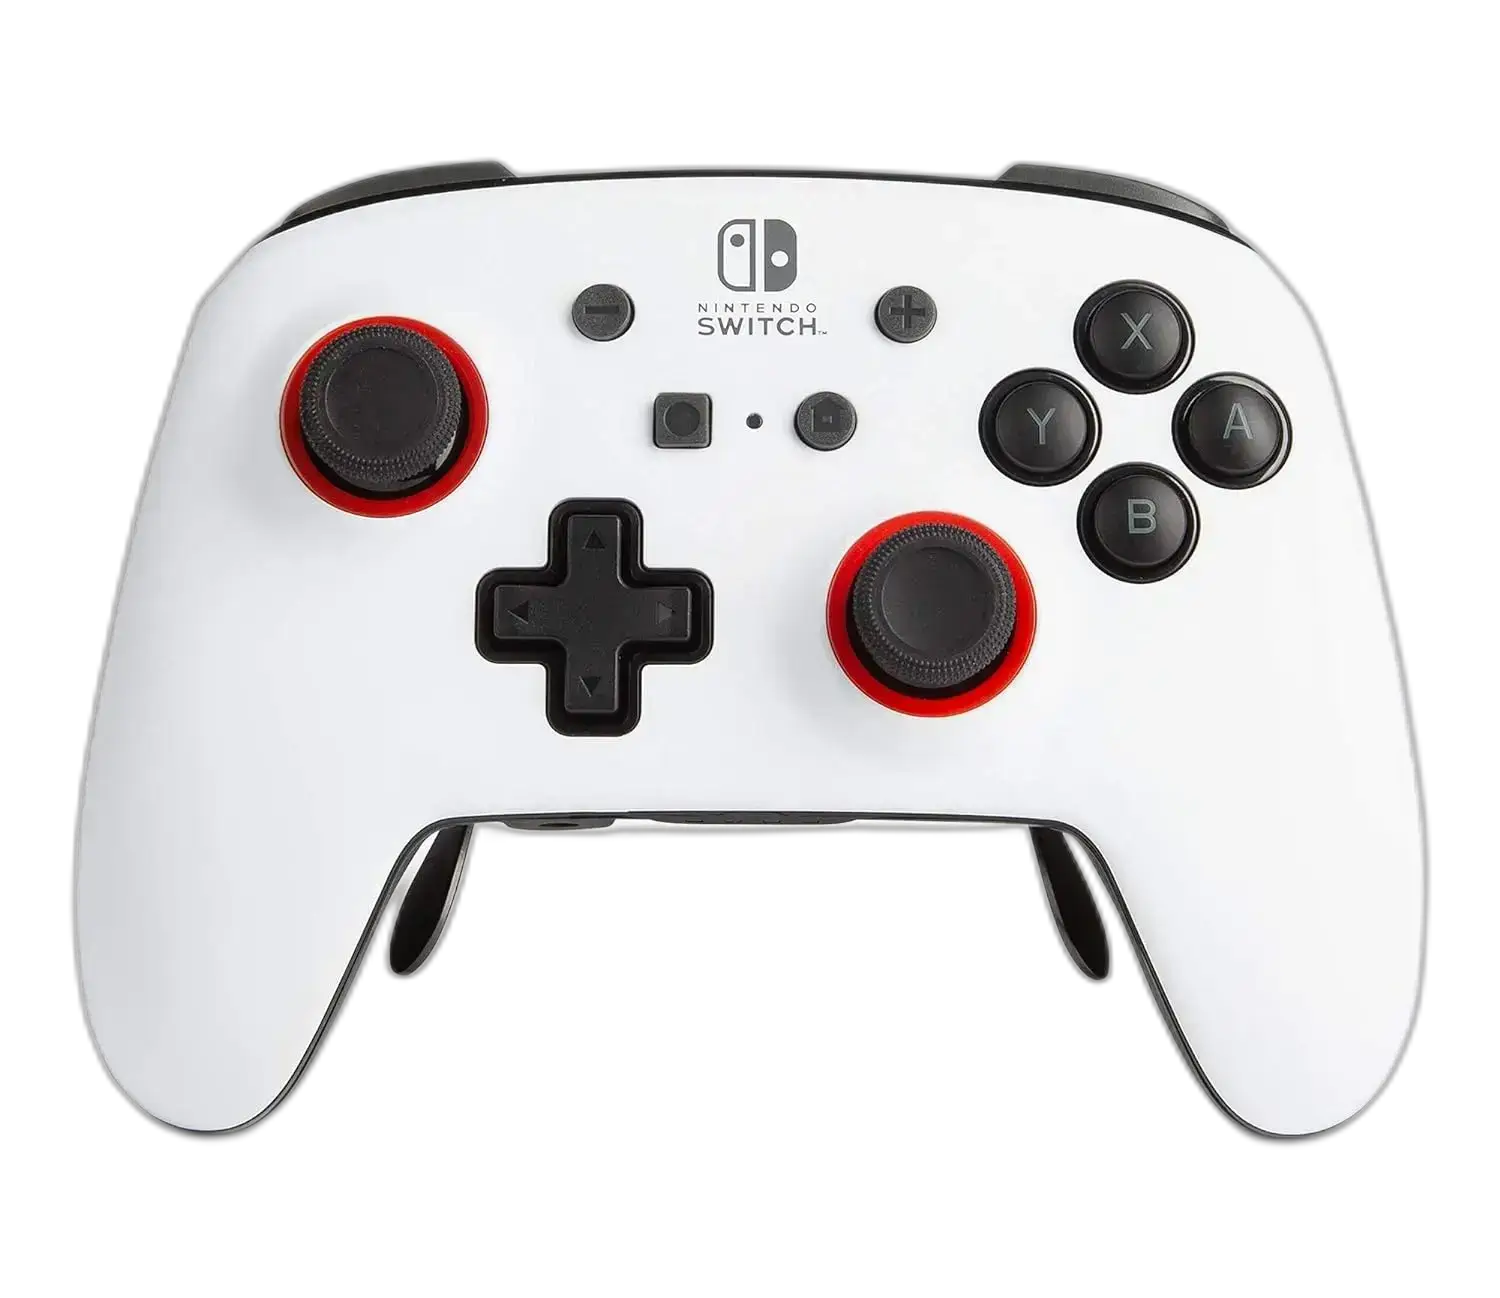 PowerA FUSION Pro Wireless Bluetooth Controller - One of the more versatile options